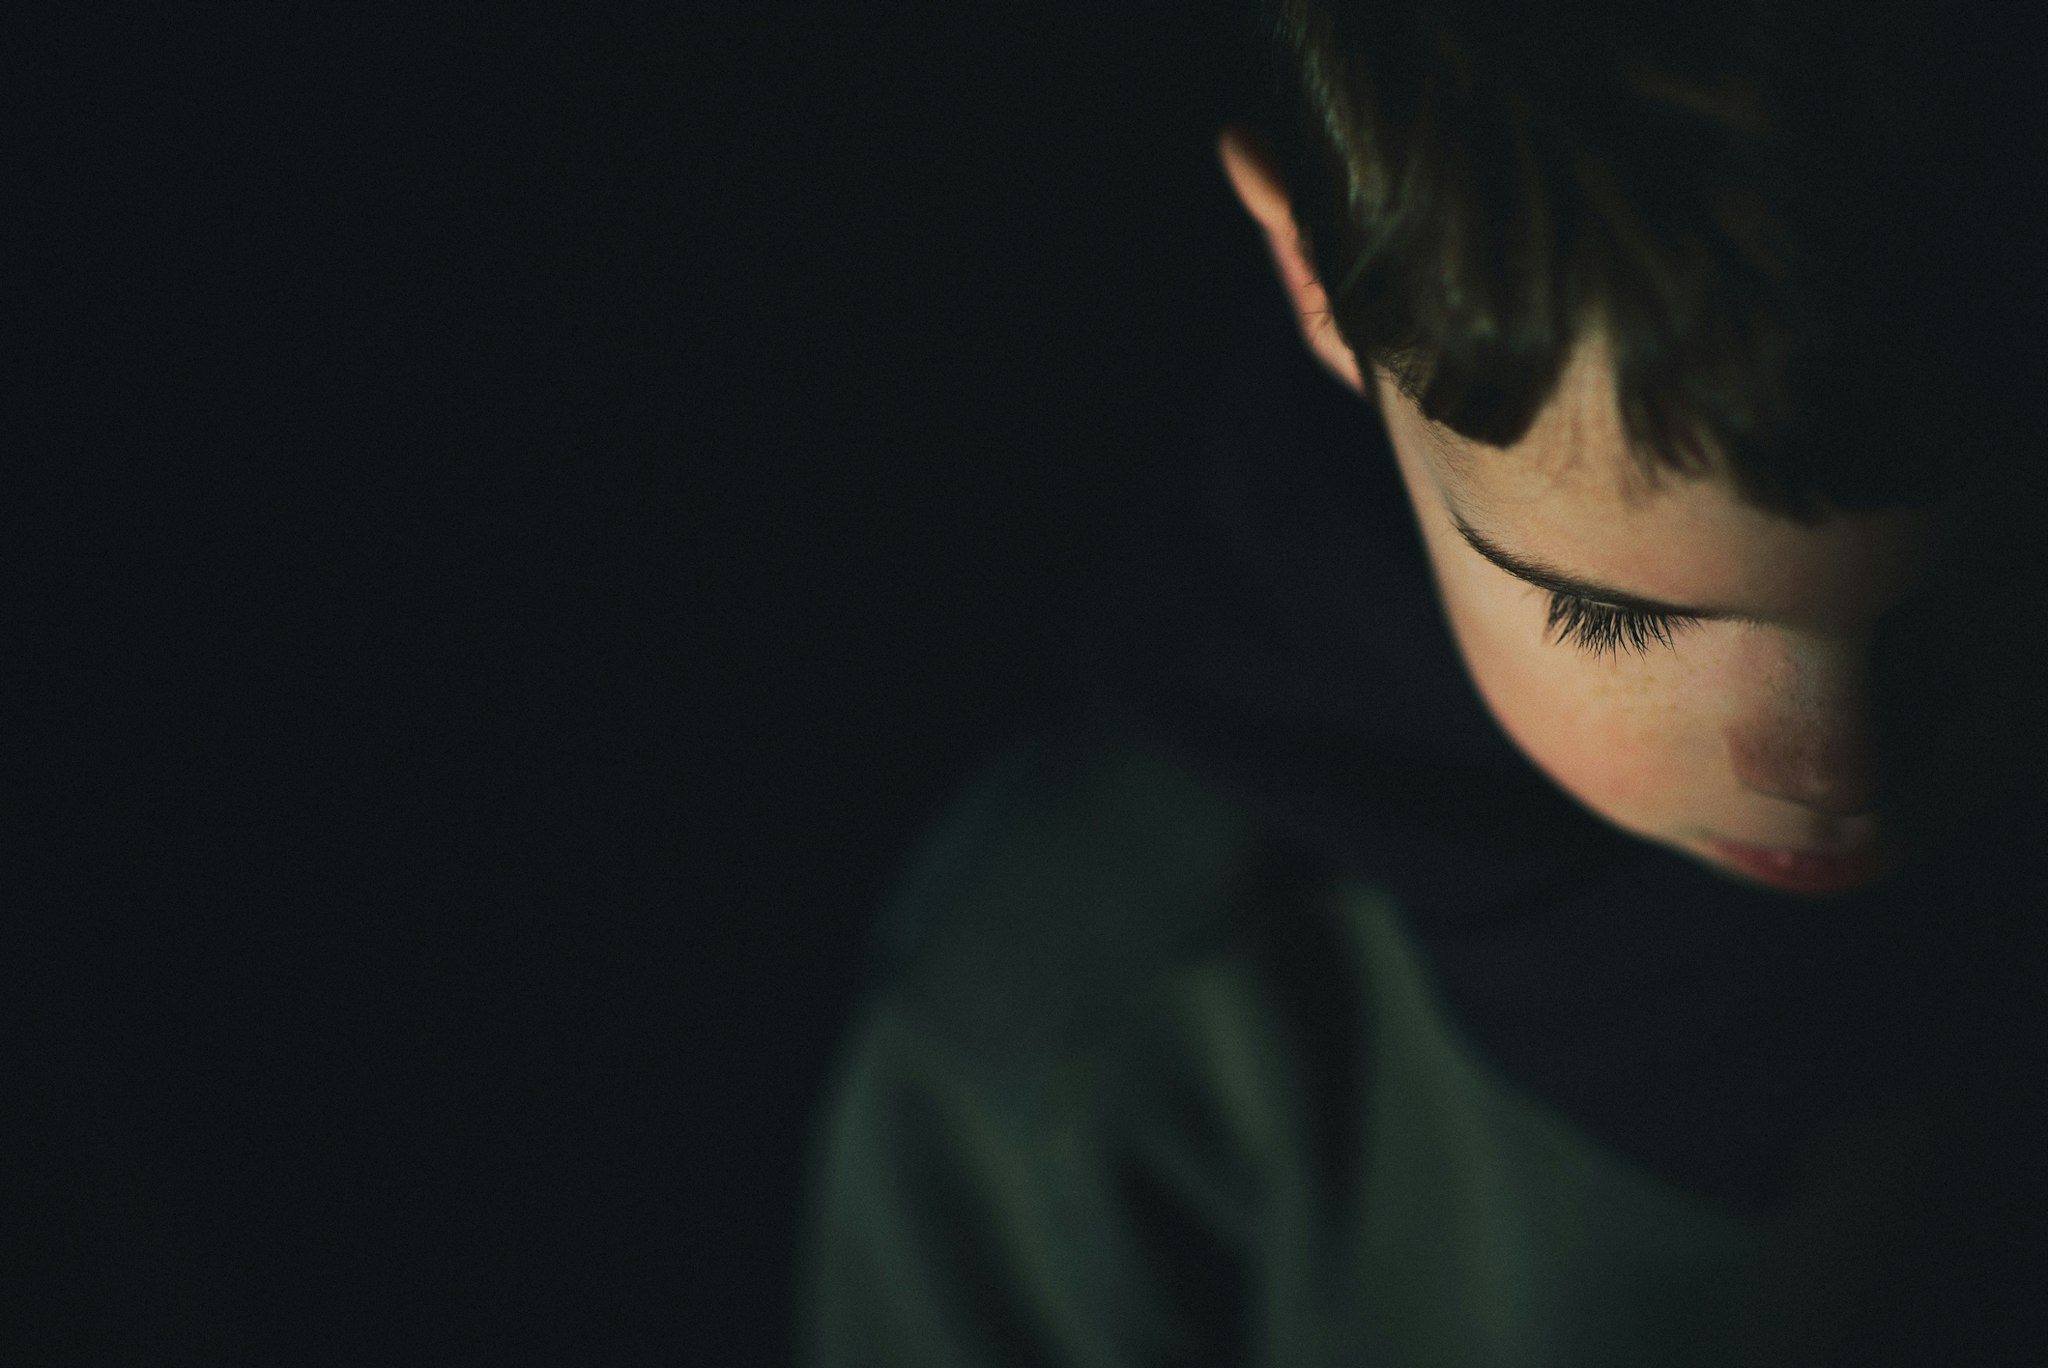 Close up of young boy looking down on dark background.